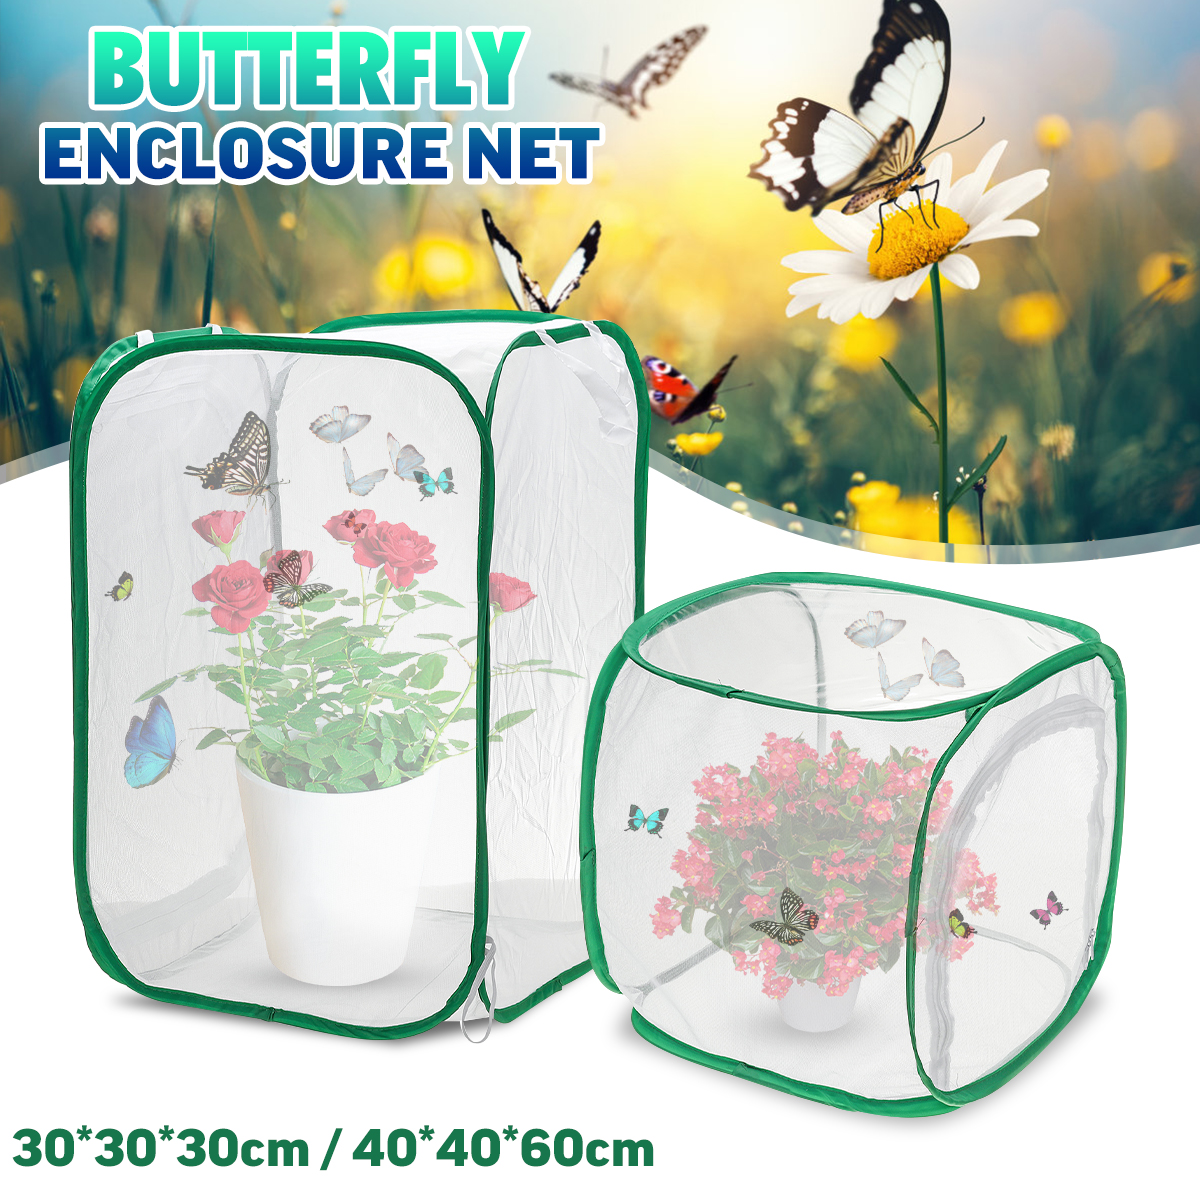 Green-Collapsible-Insect-Habitat-Cage-Butterfly-Mesh-Transparent-Surface-Portable-Zipper-Cage-Plant--1688452-1